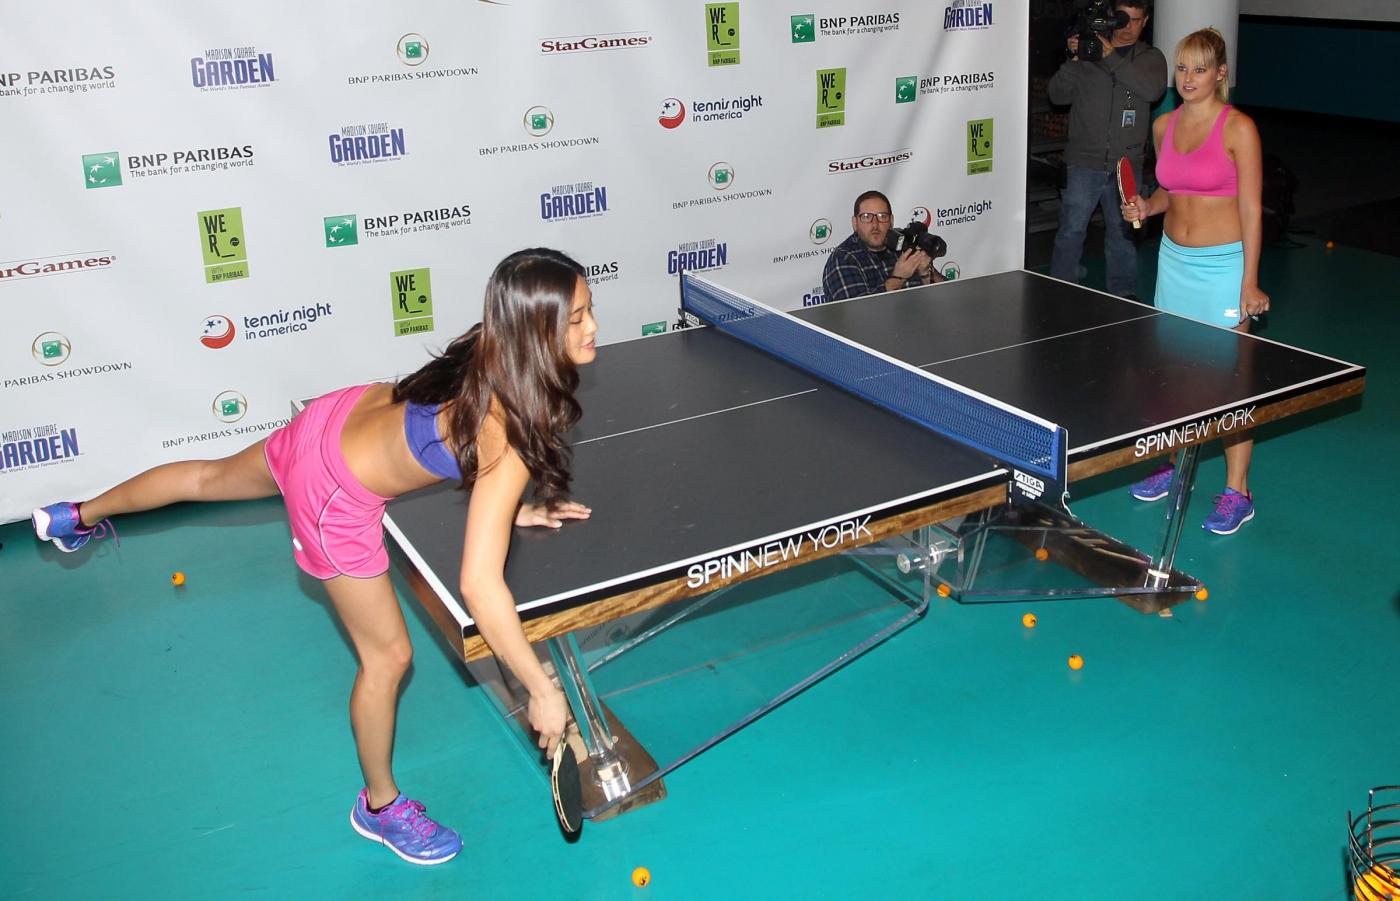 Modelle Sport Illustrated giocano a ping pong 07